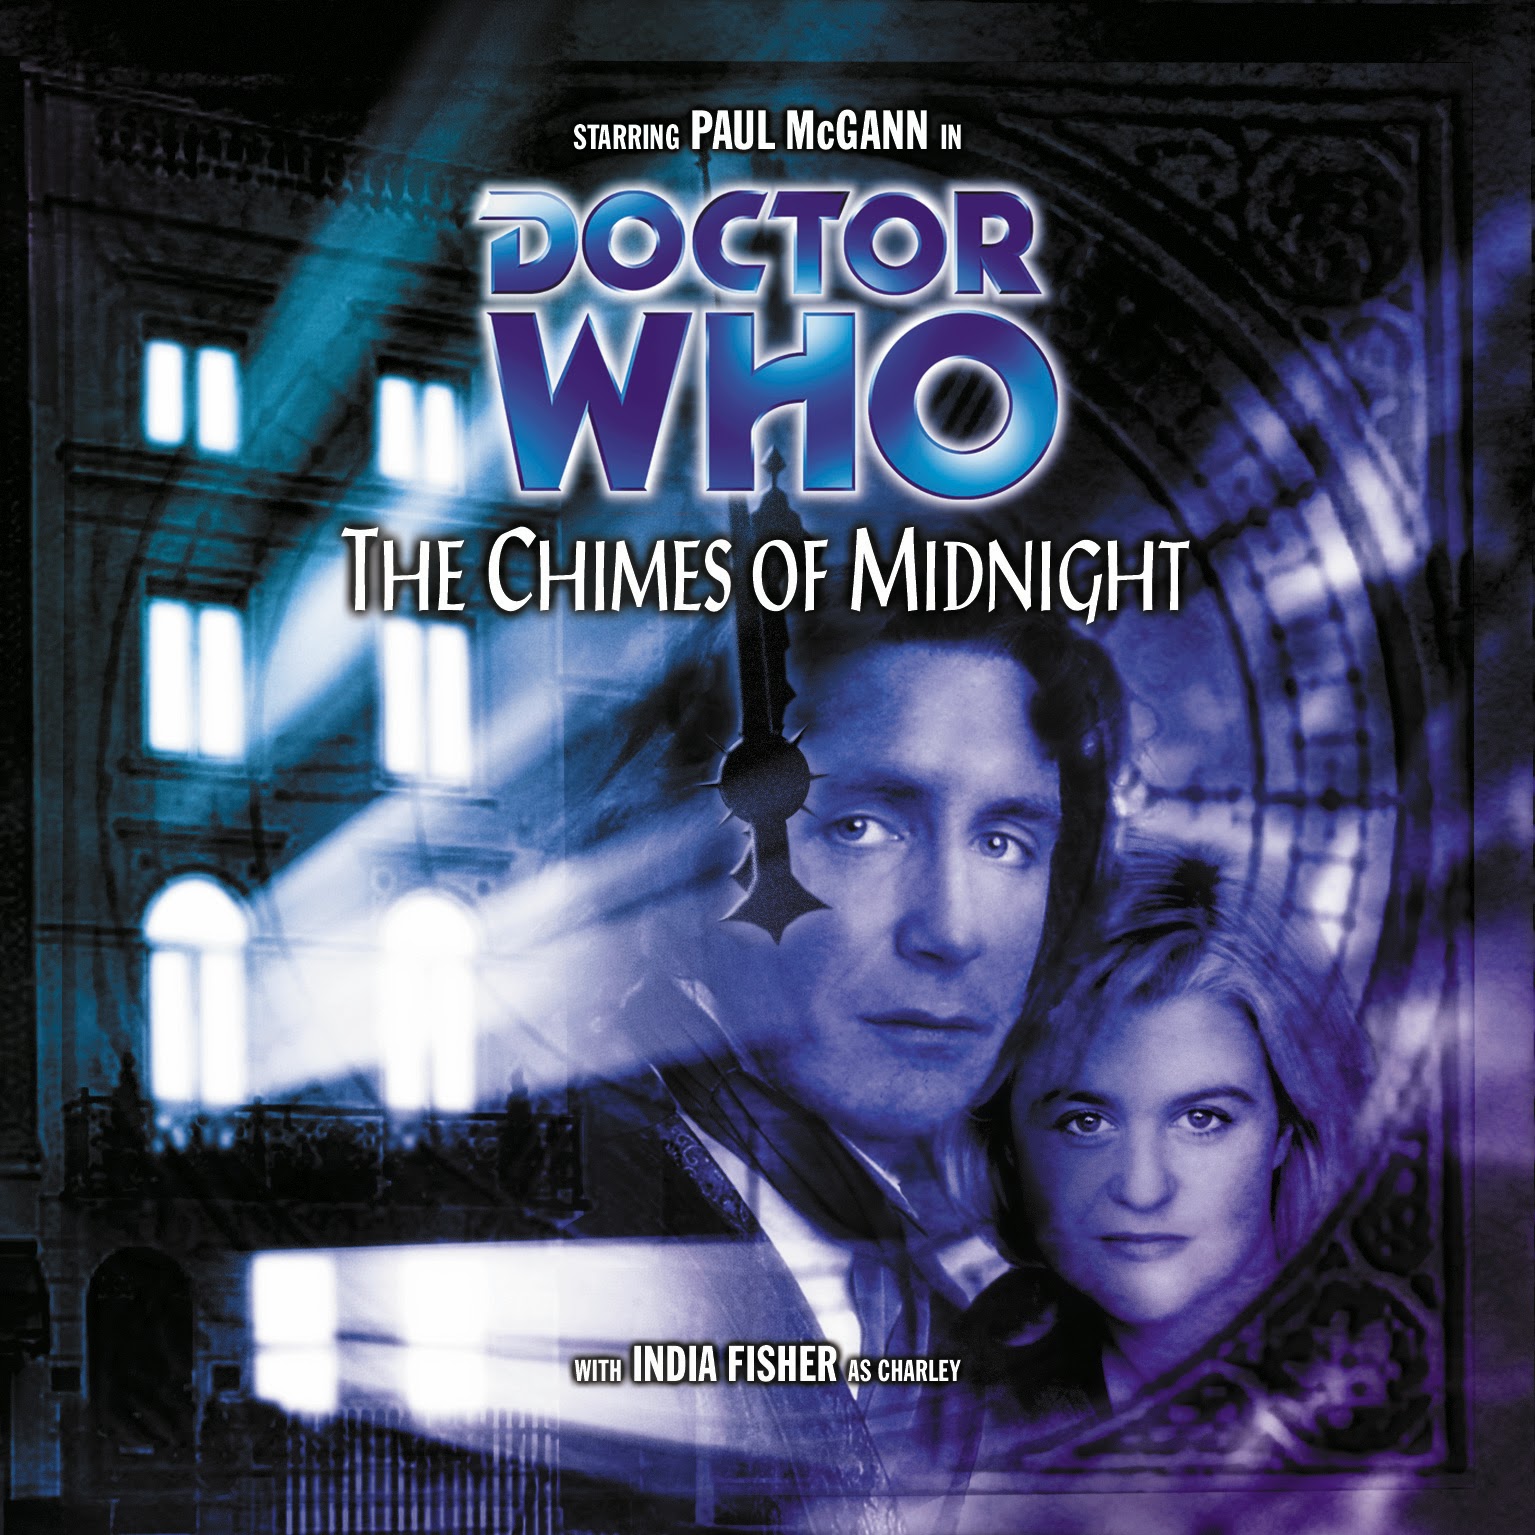 The Chimes of Midnight